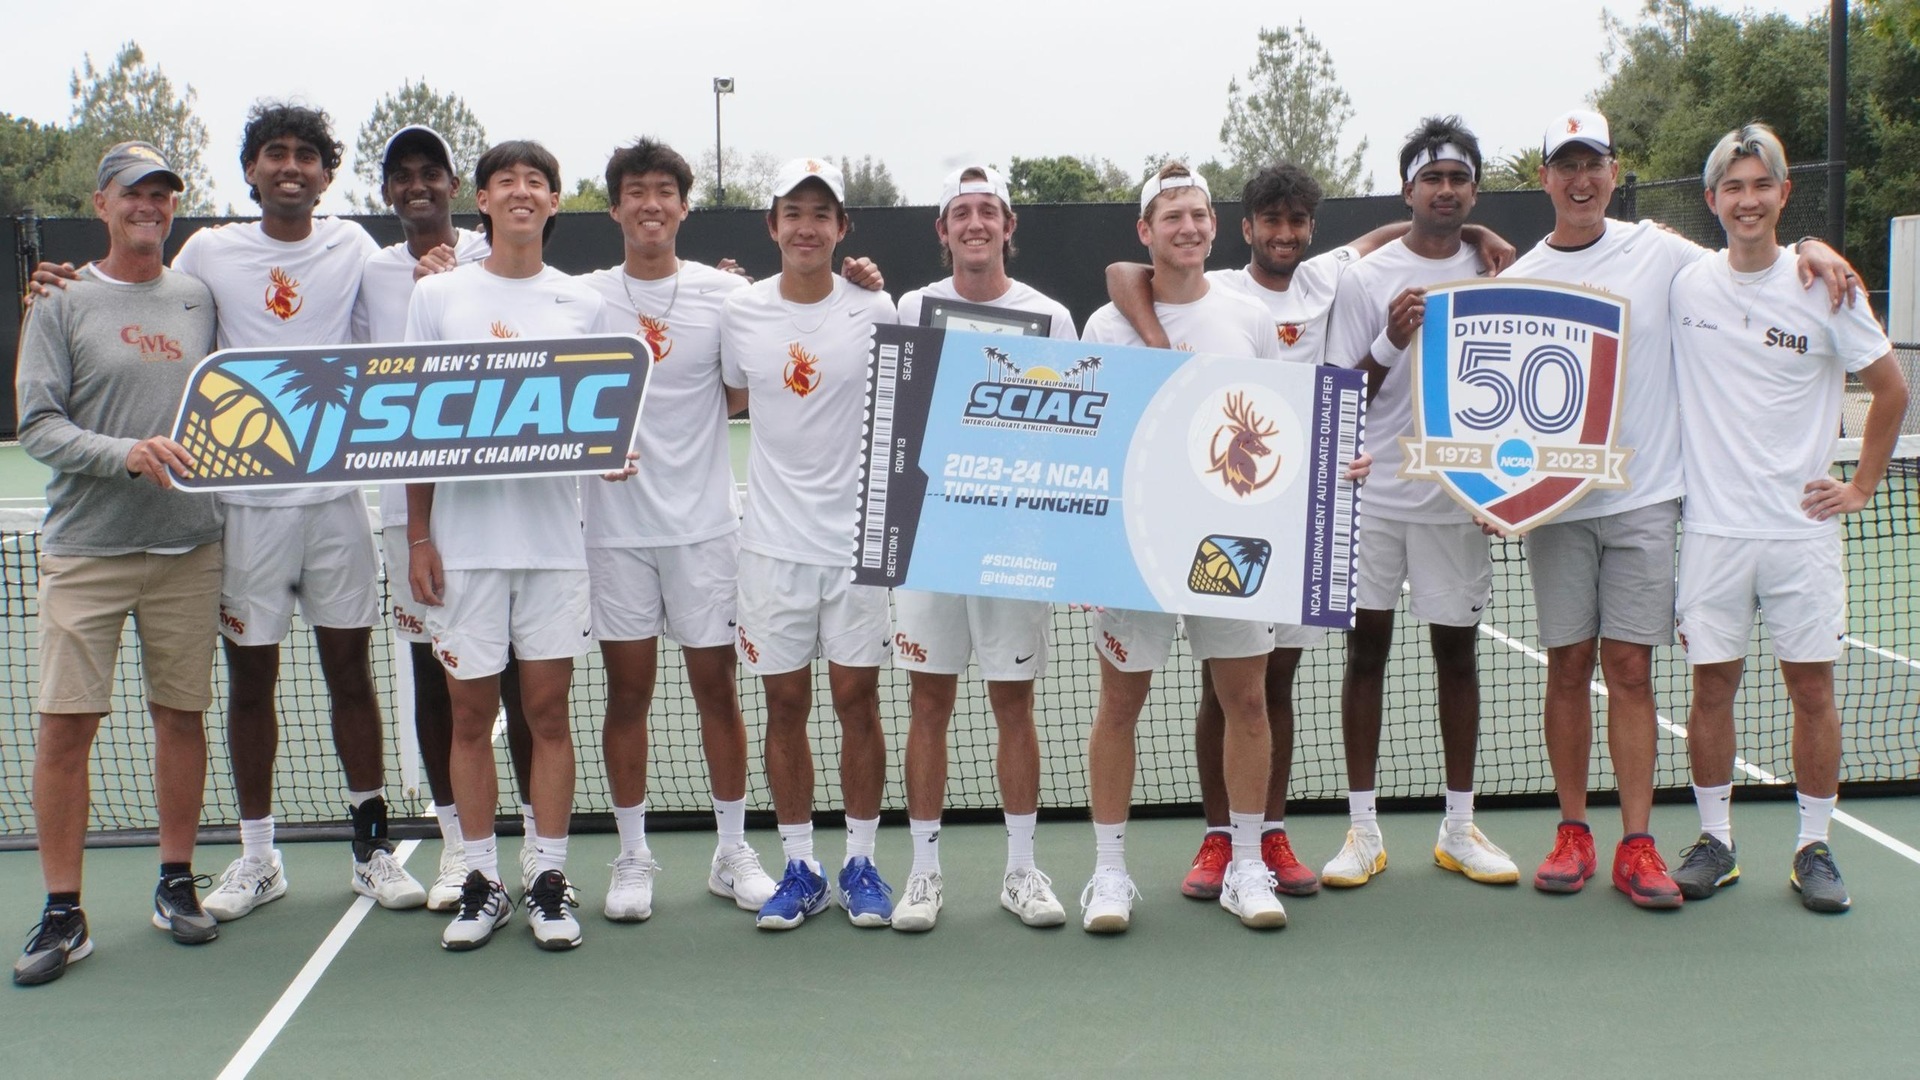 CMS earned the SCIAC's automatic bid for the 18th straight season